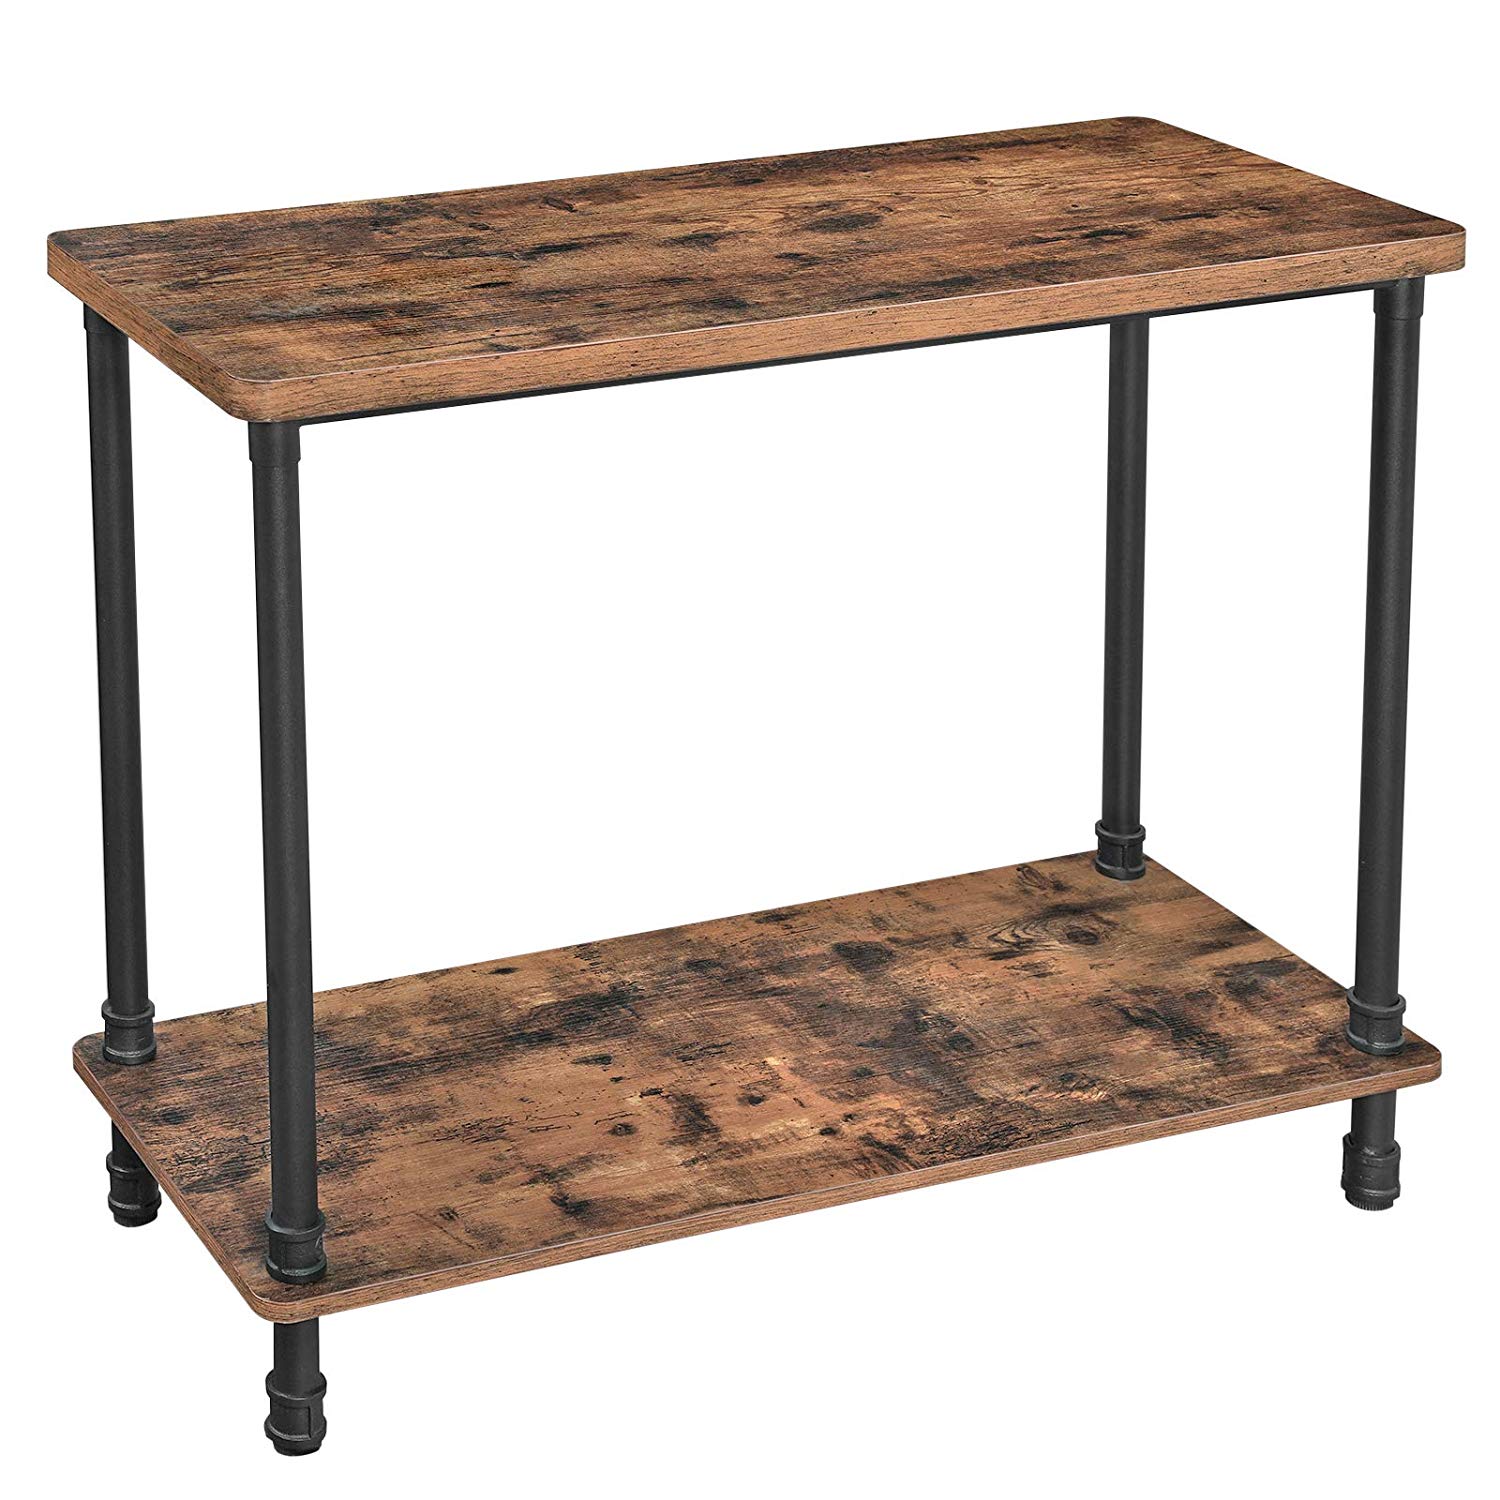 VASAGLE URBENCE Iron Legs Console Table